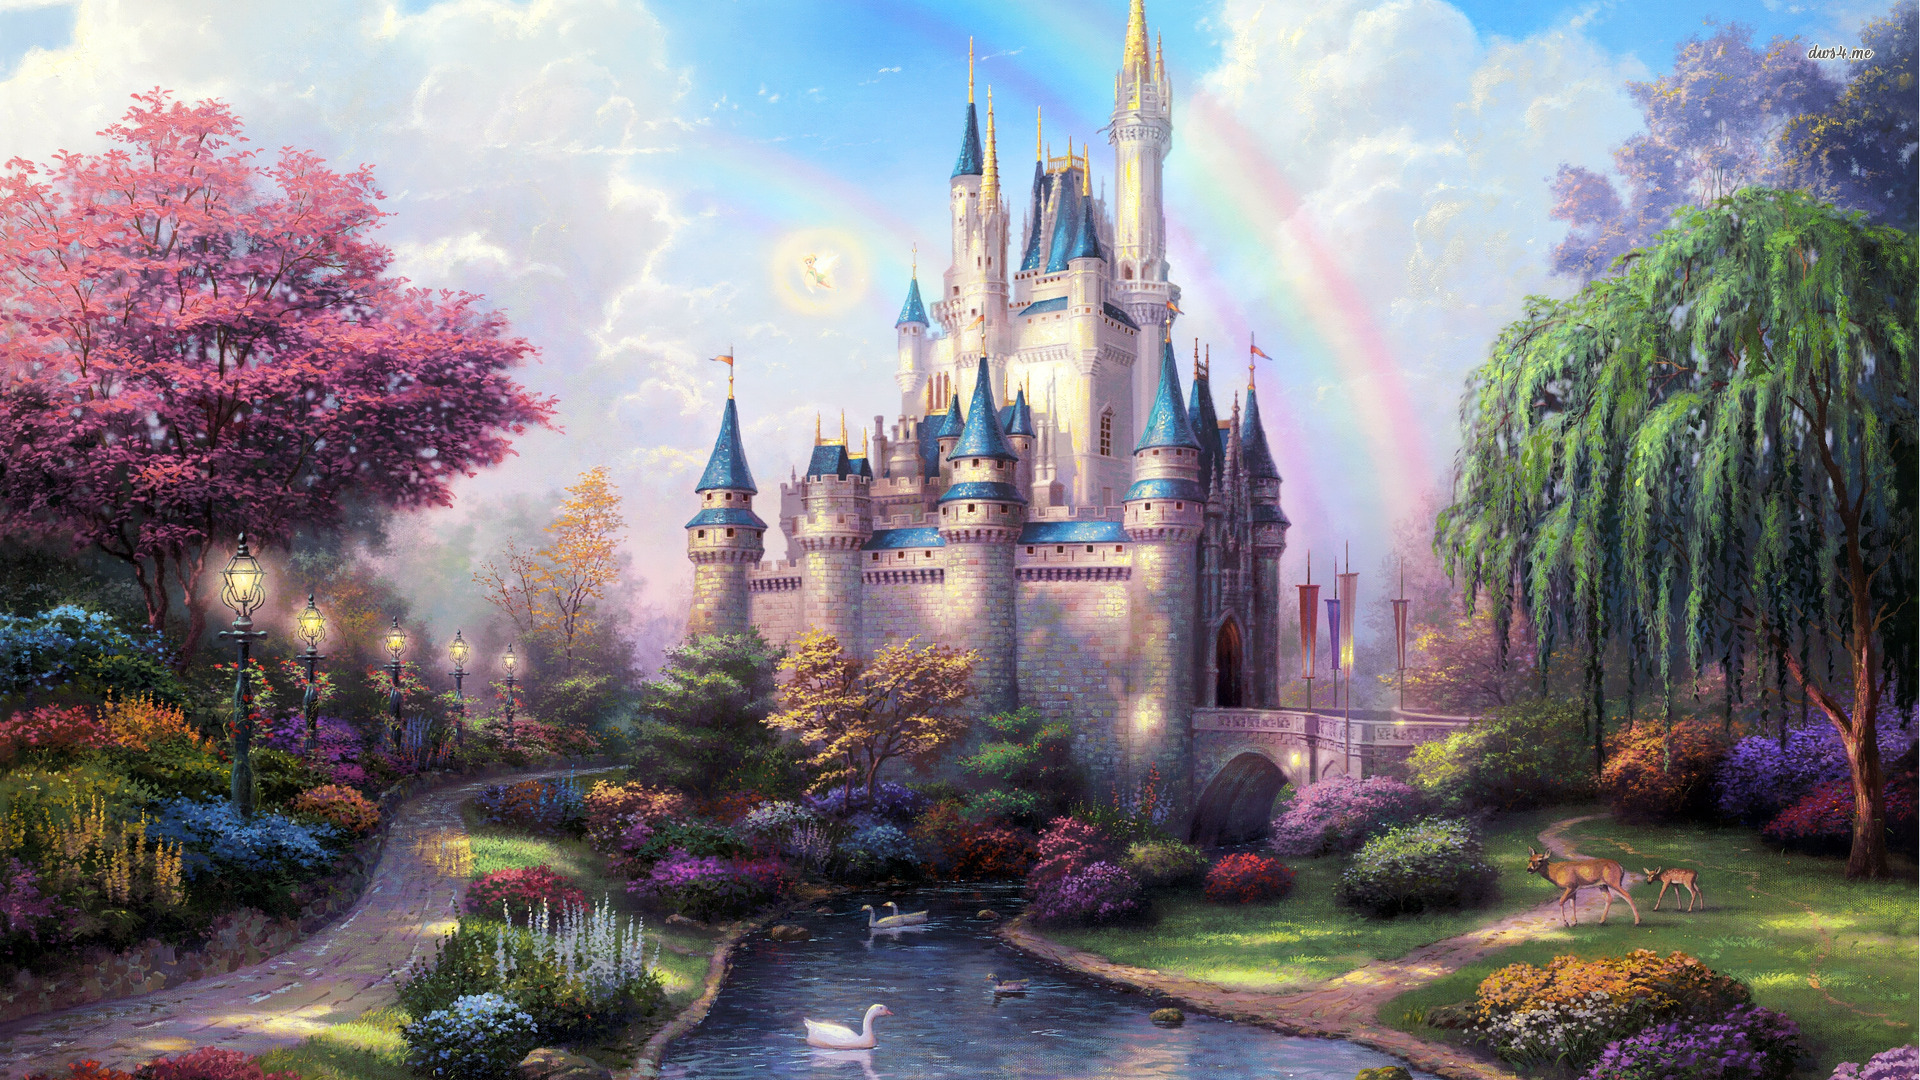 Fairy tale background